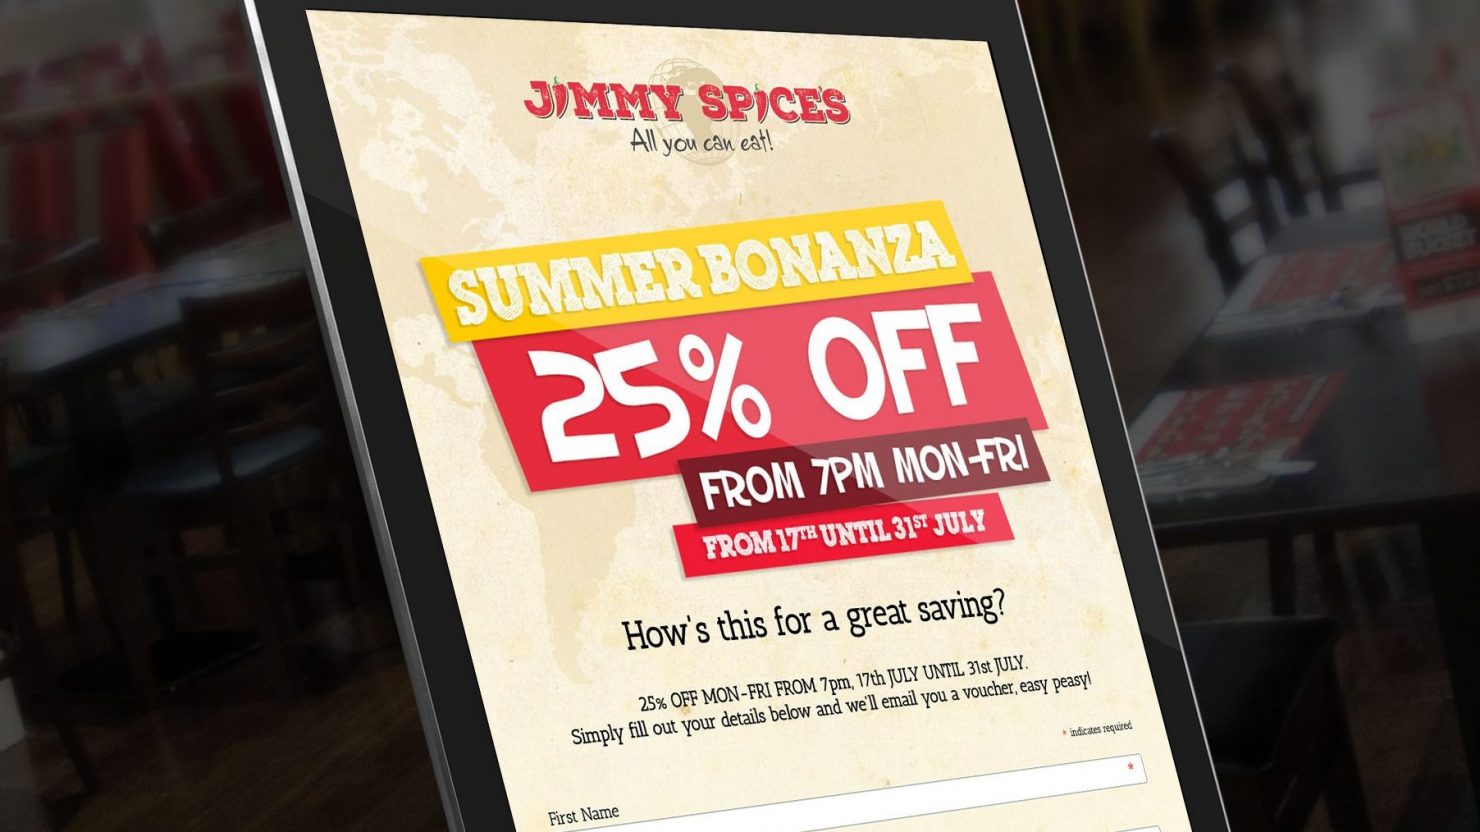 iPad showing email marketing campaign for Birmingham restaurant